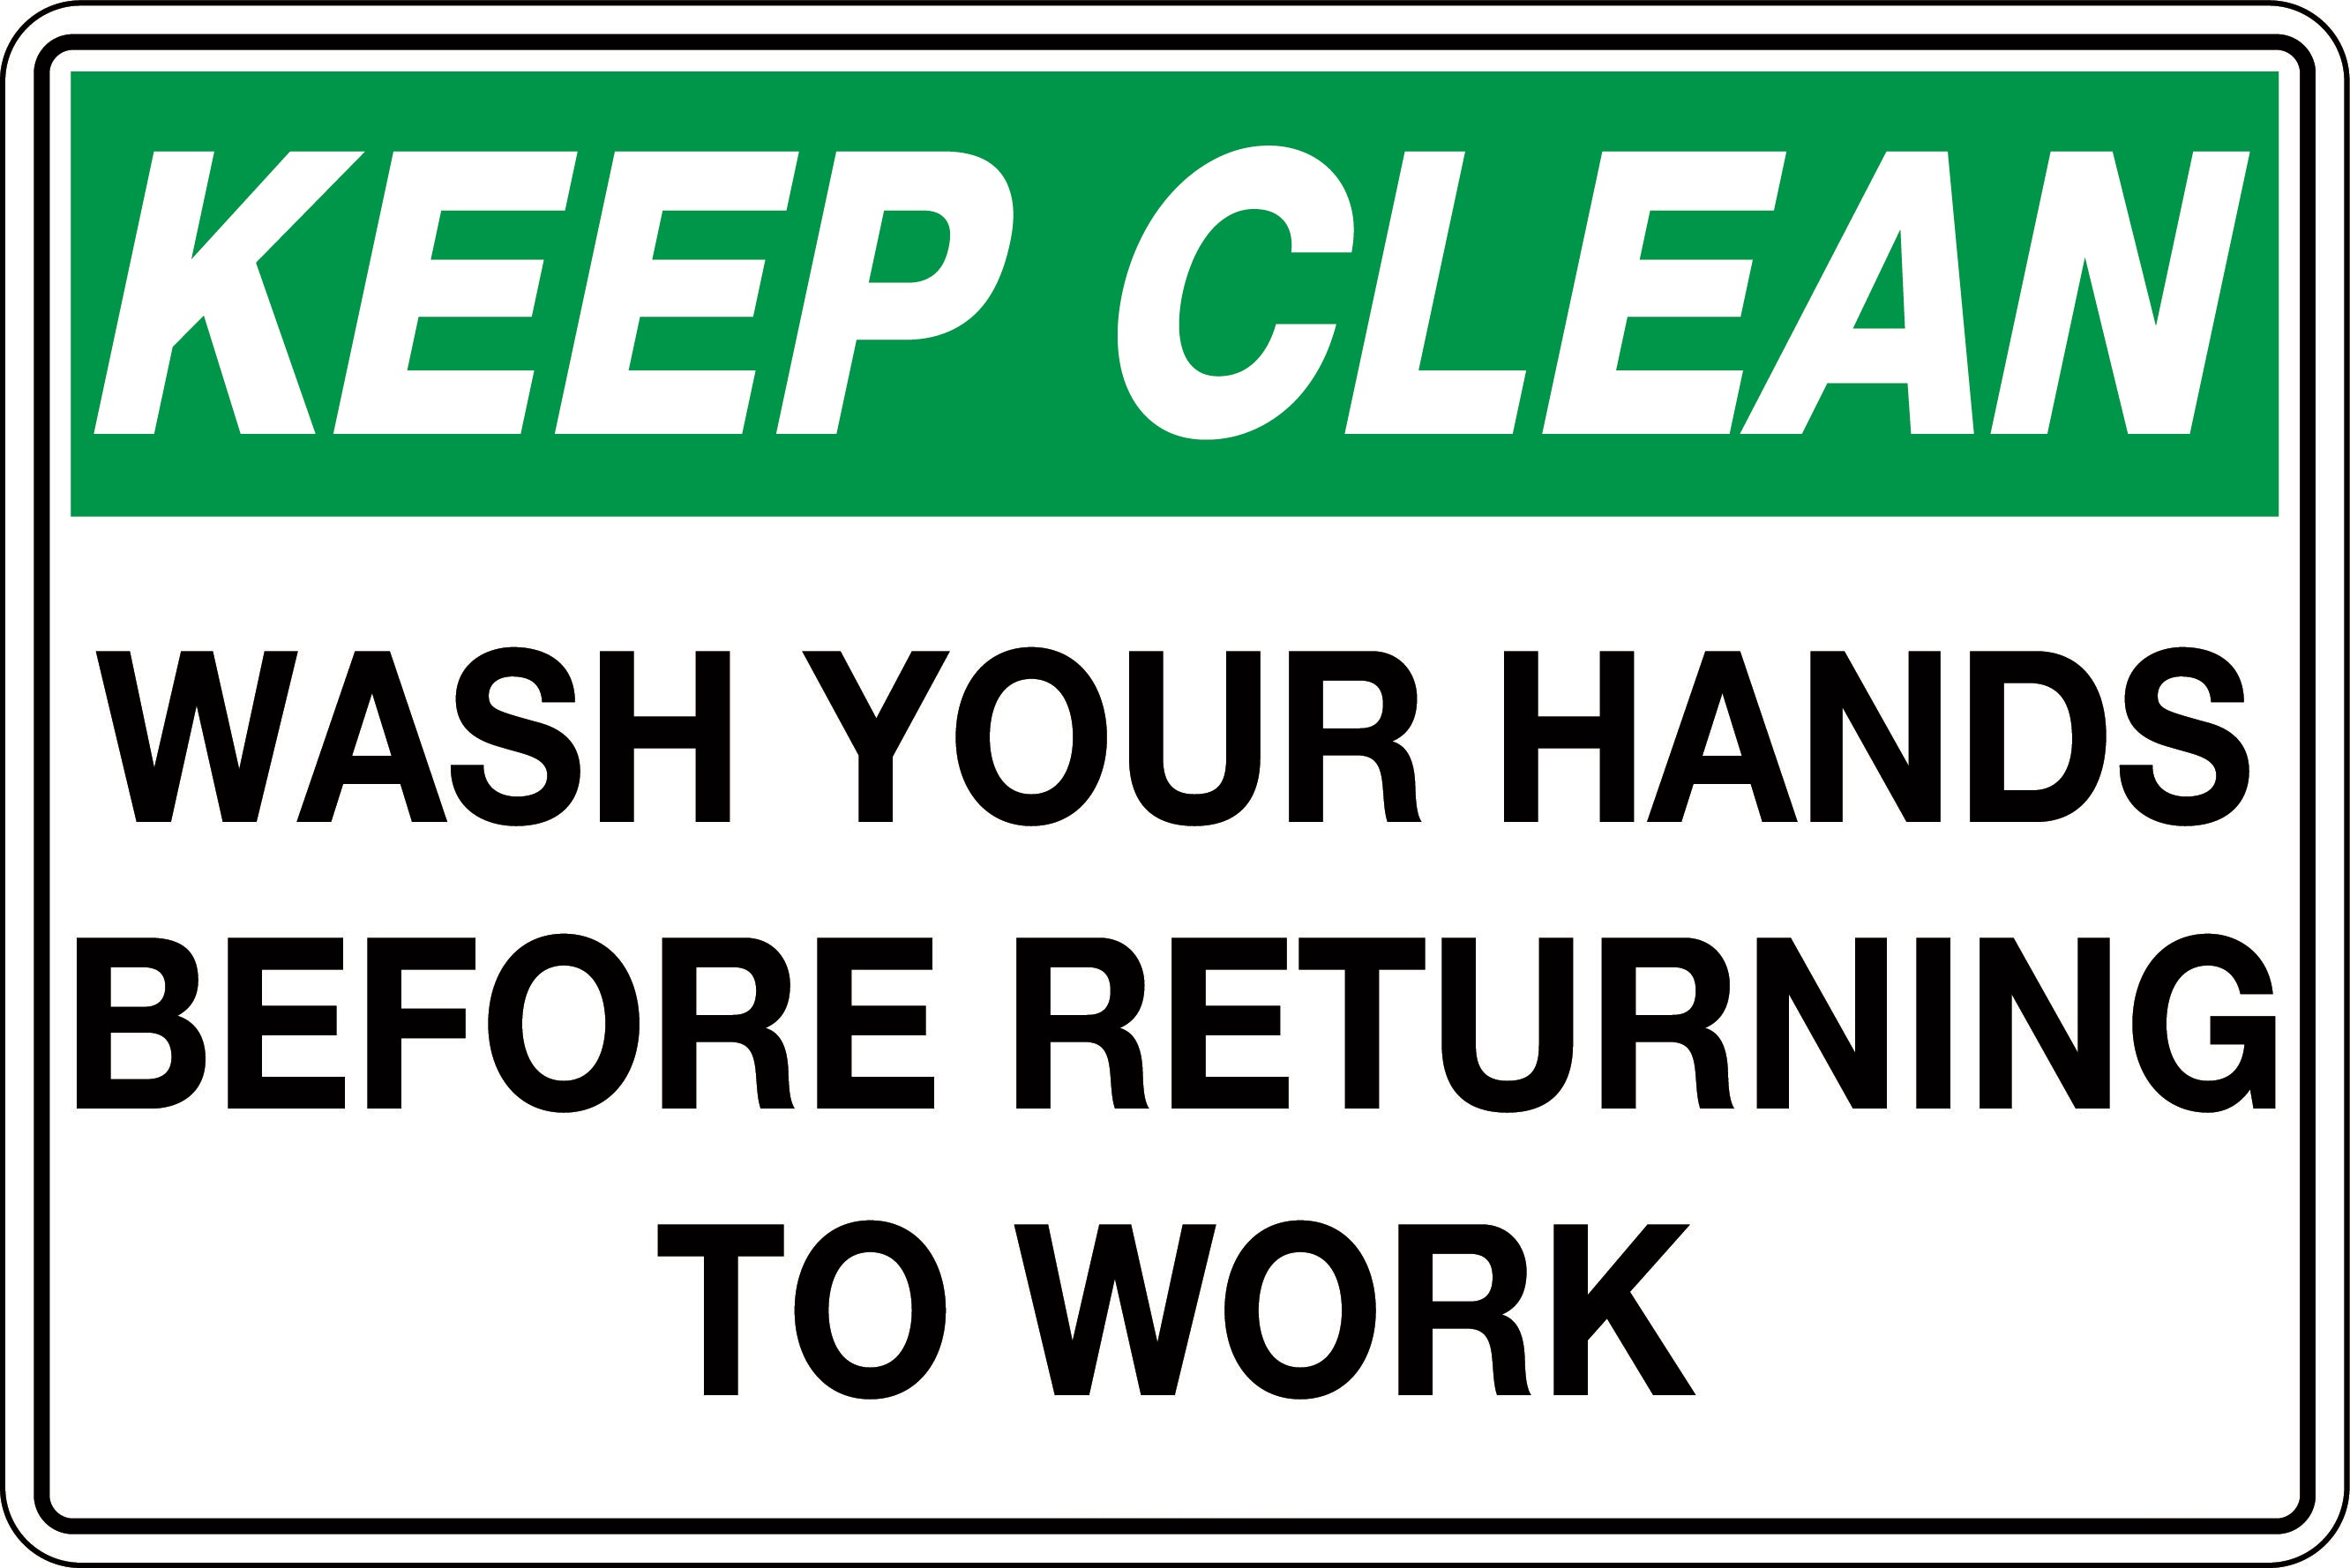 keep-clean-please-wash-your-hands-before-returning-to-work-sign